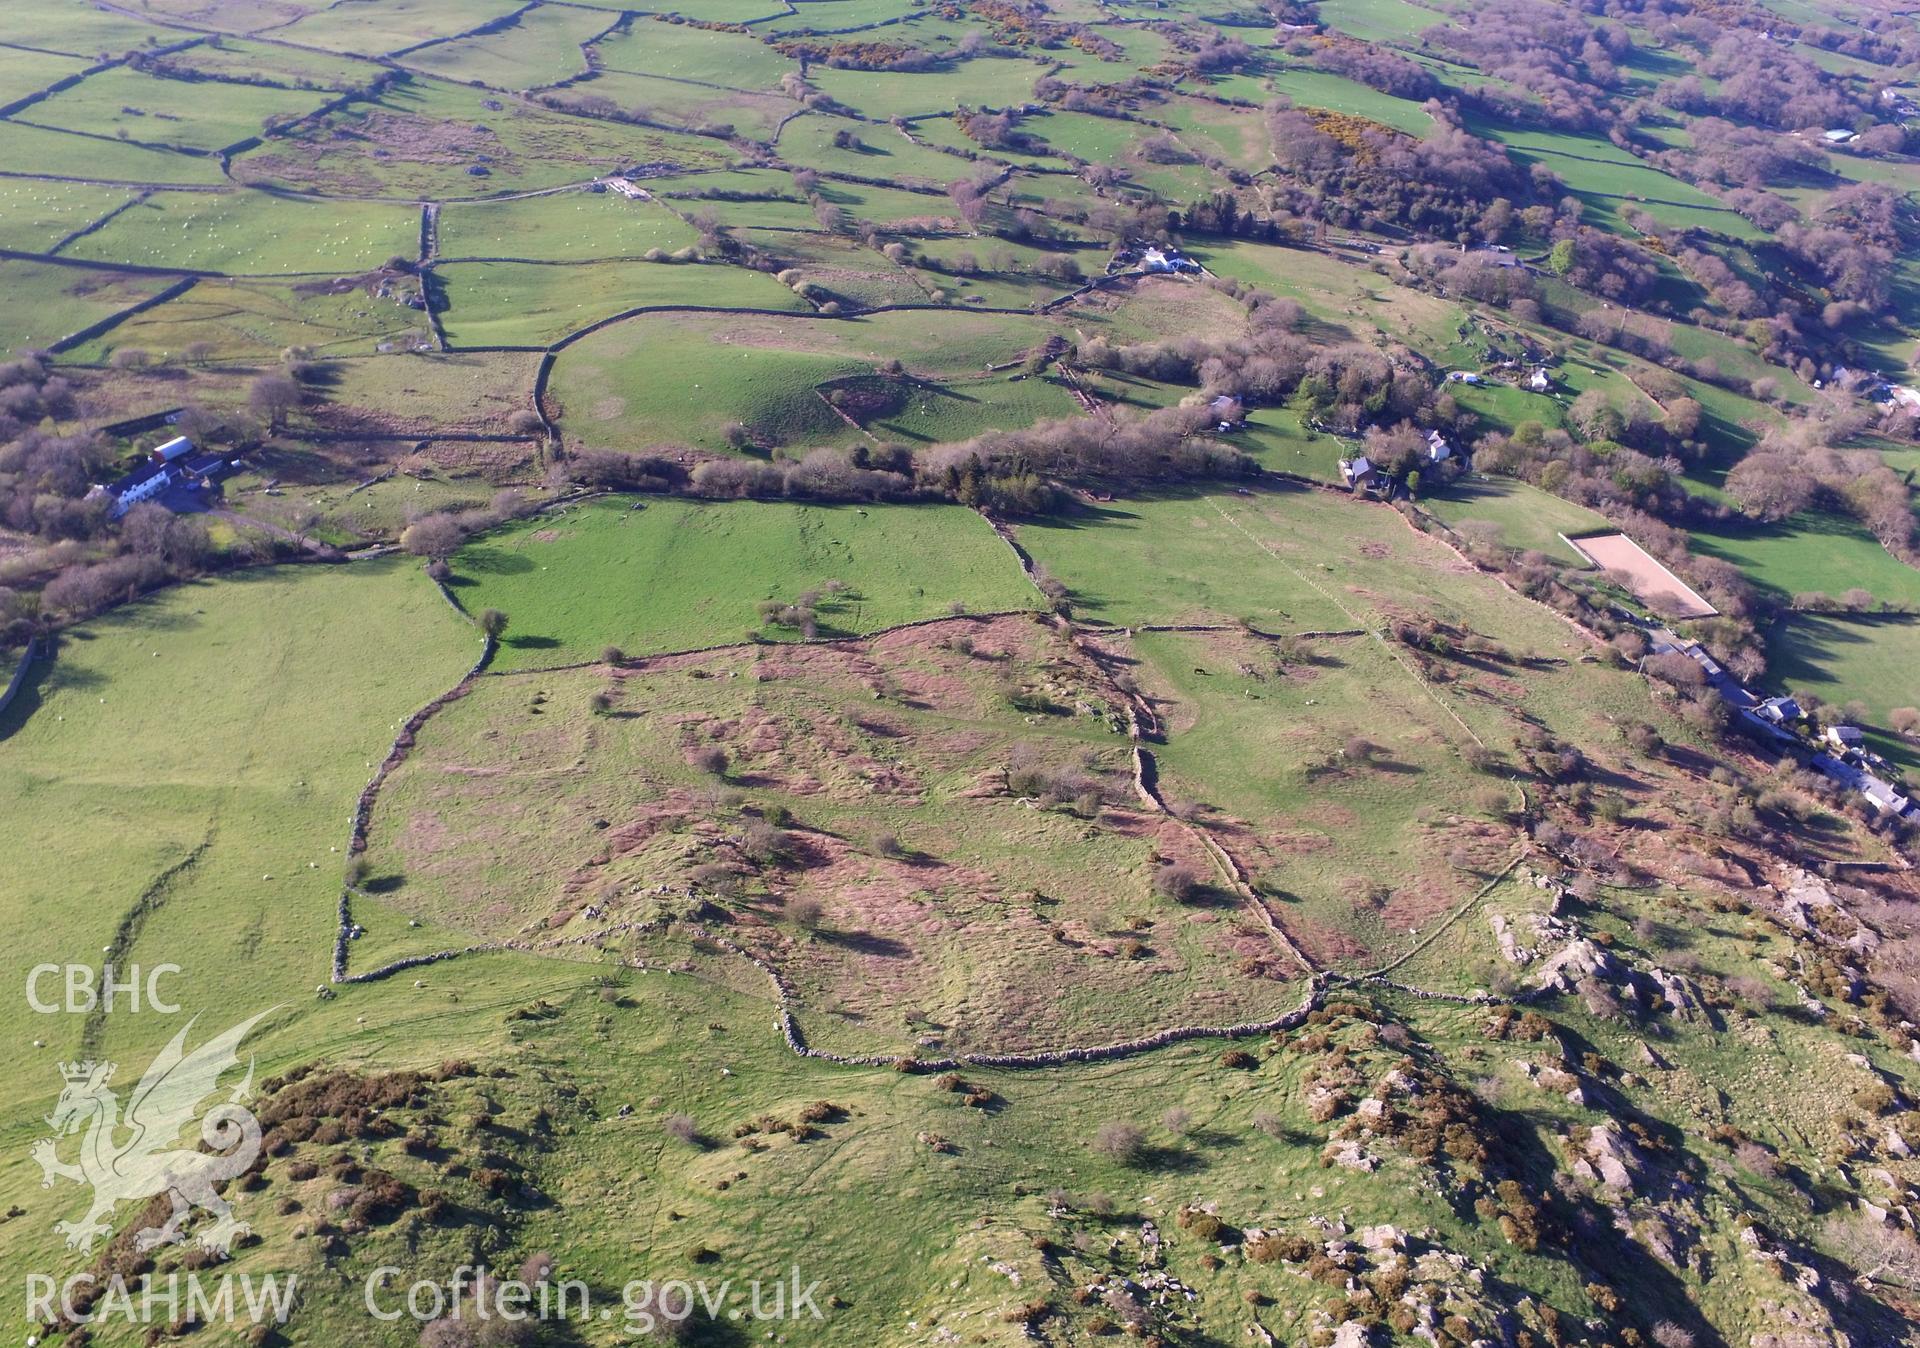 Colour photo showing aerial view of an enclosed hut group on the north slope of Cerrig-y-Dinas, taken by Paul R. Davis, 20th April 2018.